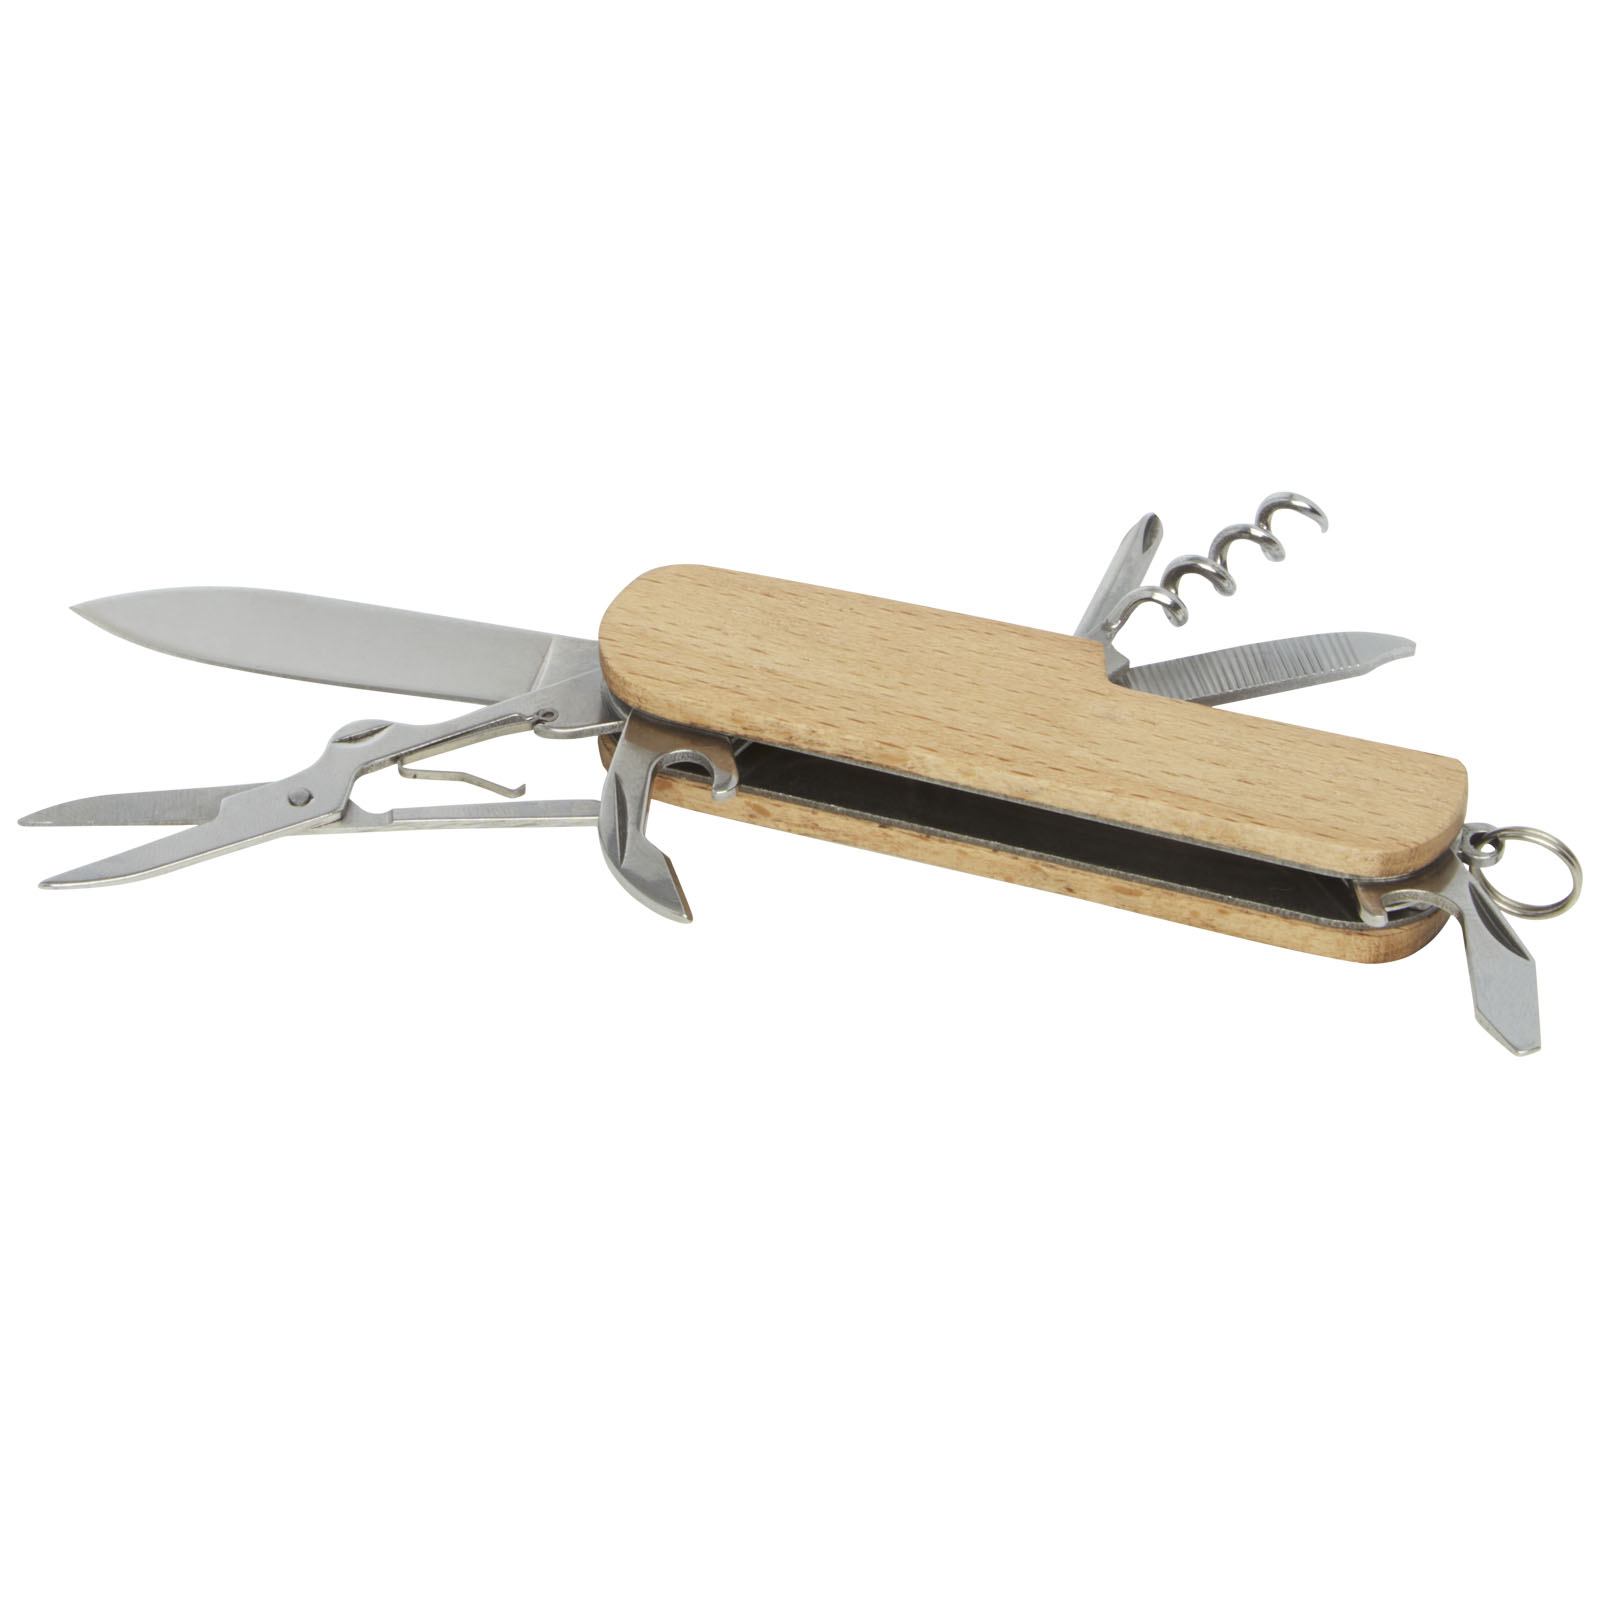 Tools & Car Accessories - Richard 7-function wooden pocket knife